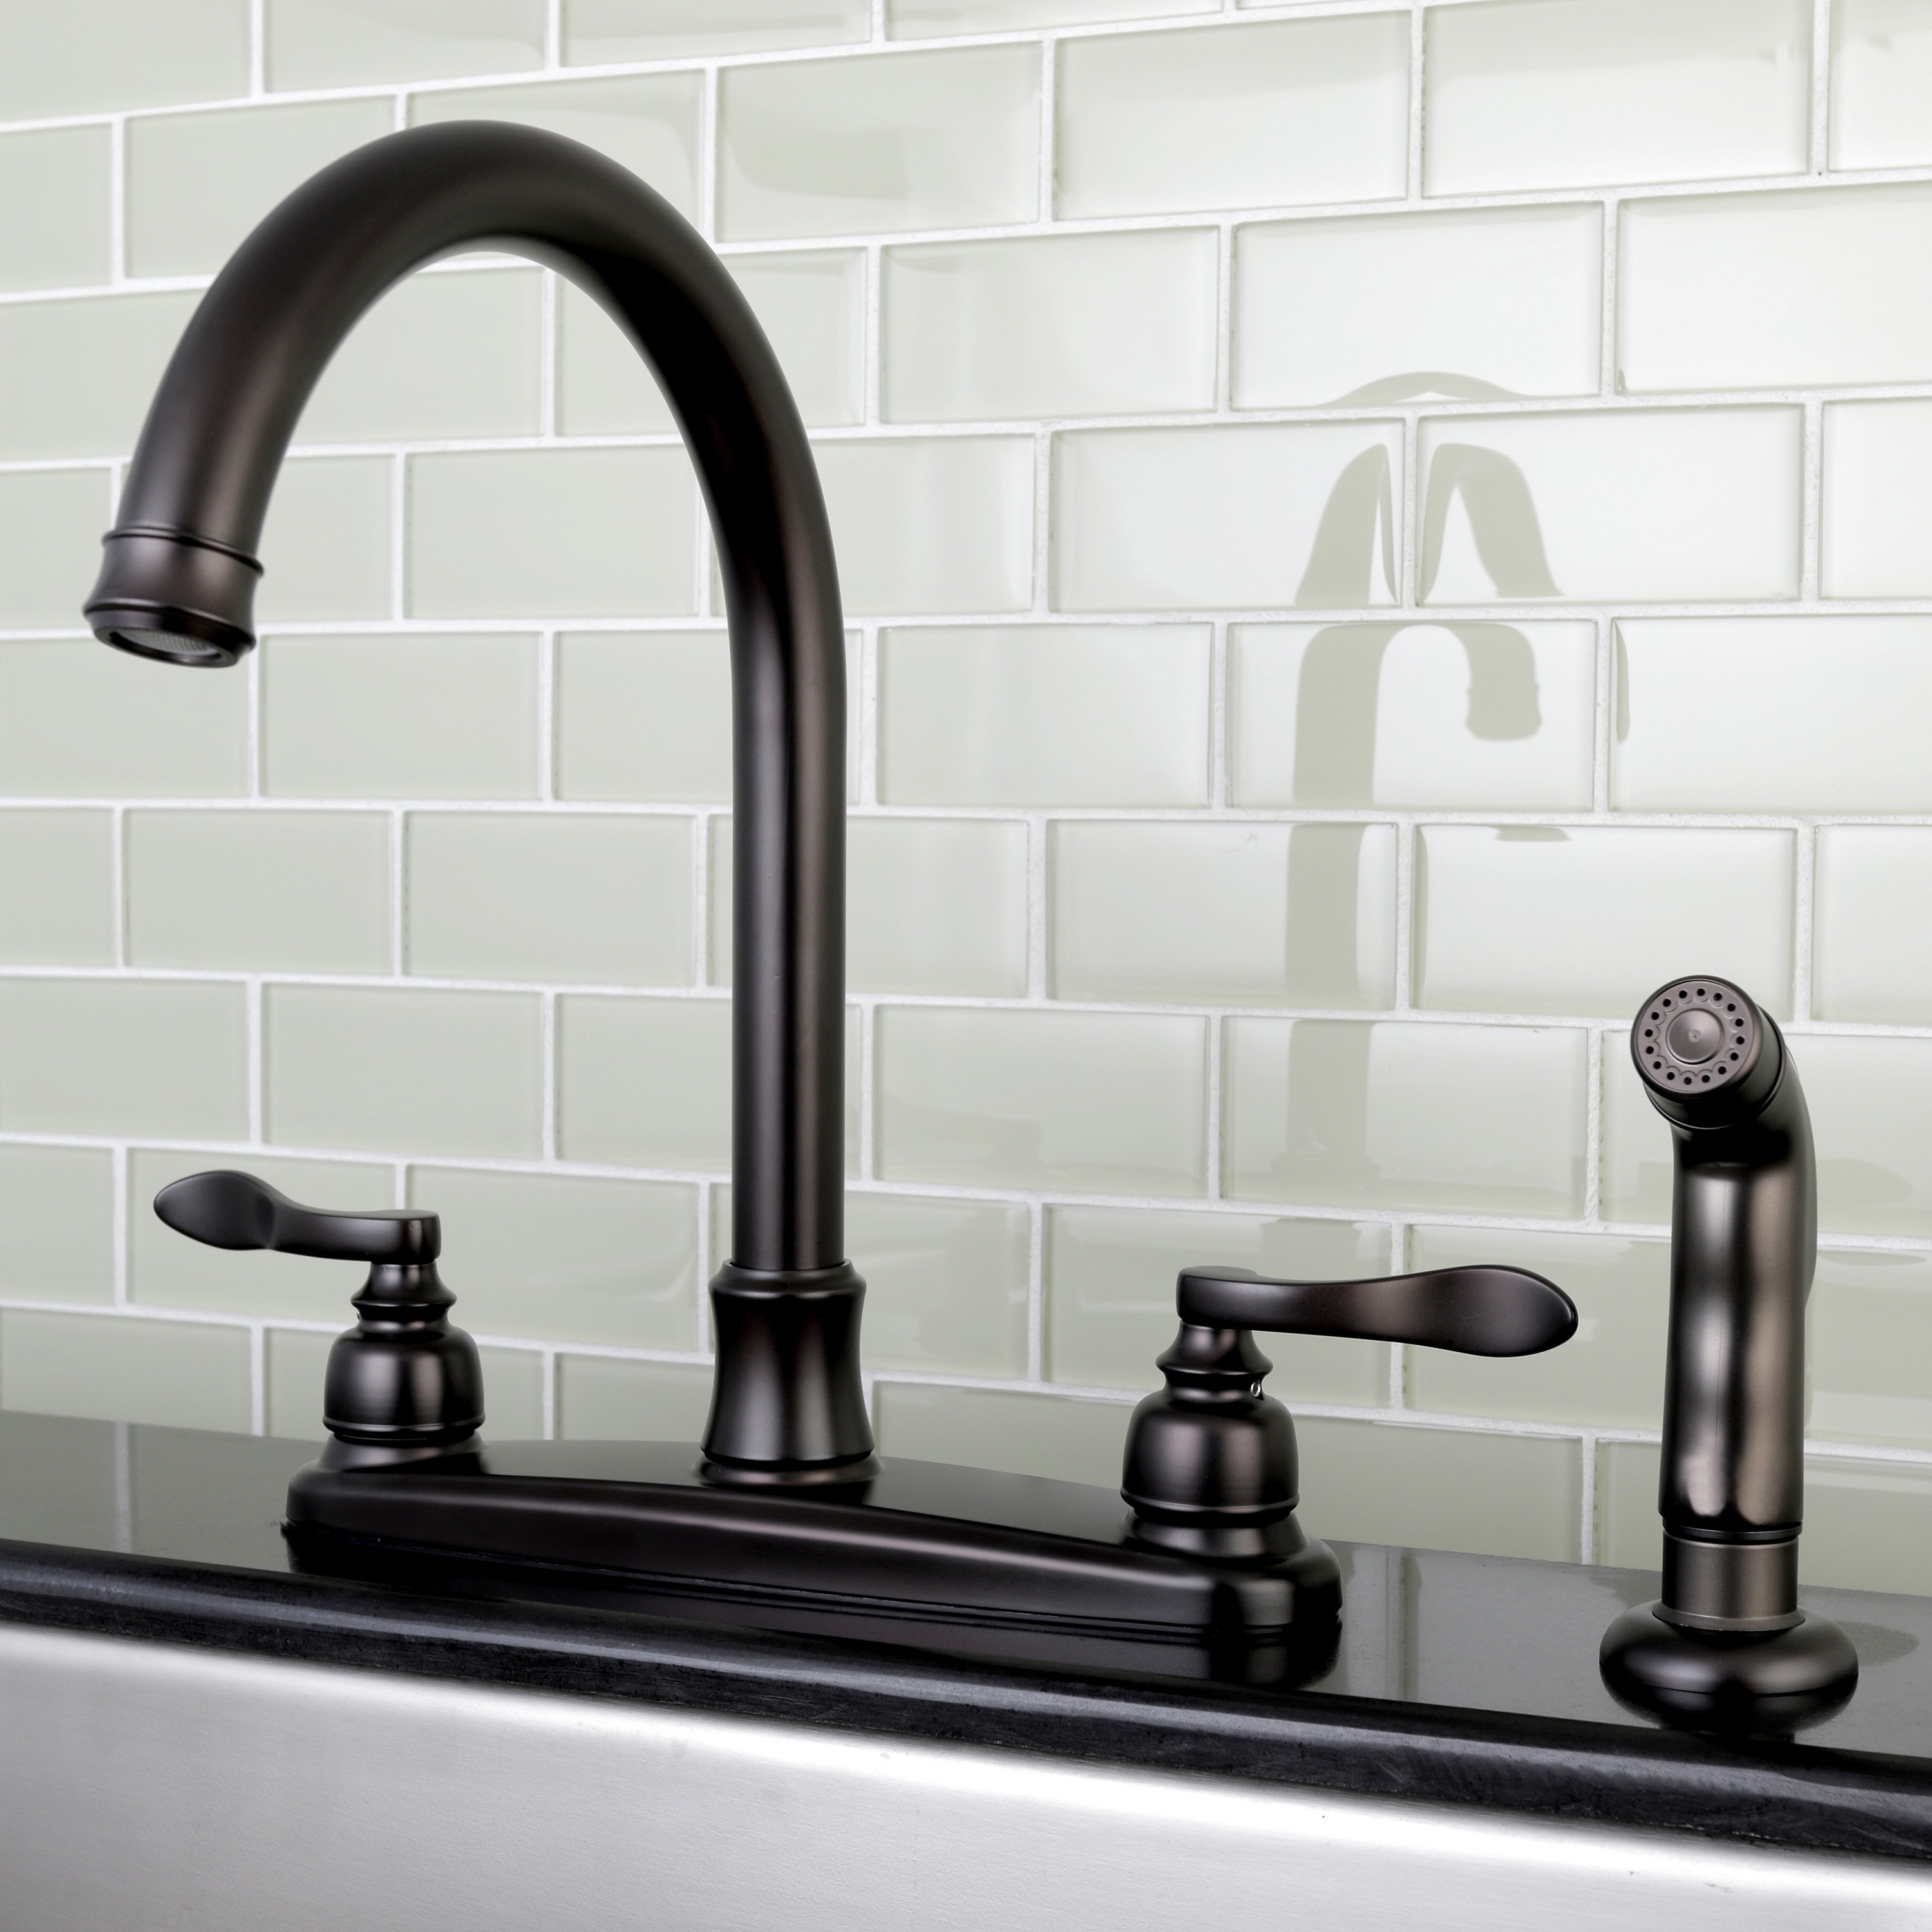 Designer Oil Rubbed Bronze Kitchen Faucet With Side Sprayer On Sale Overstock 12041348